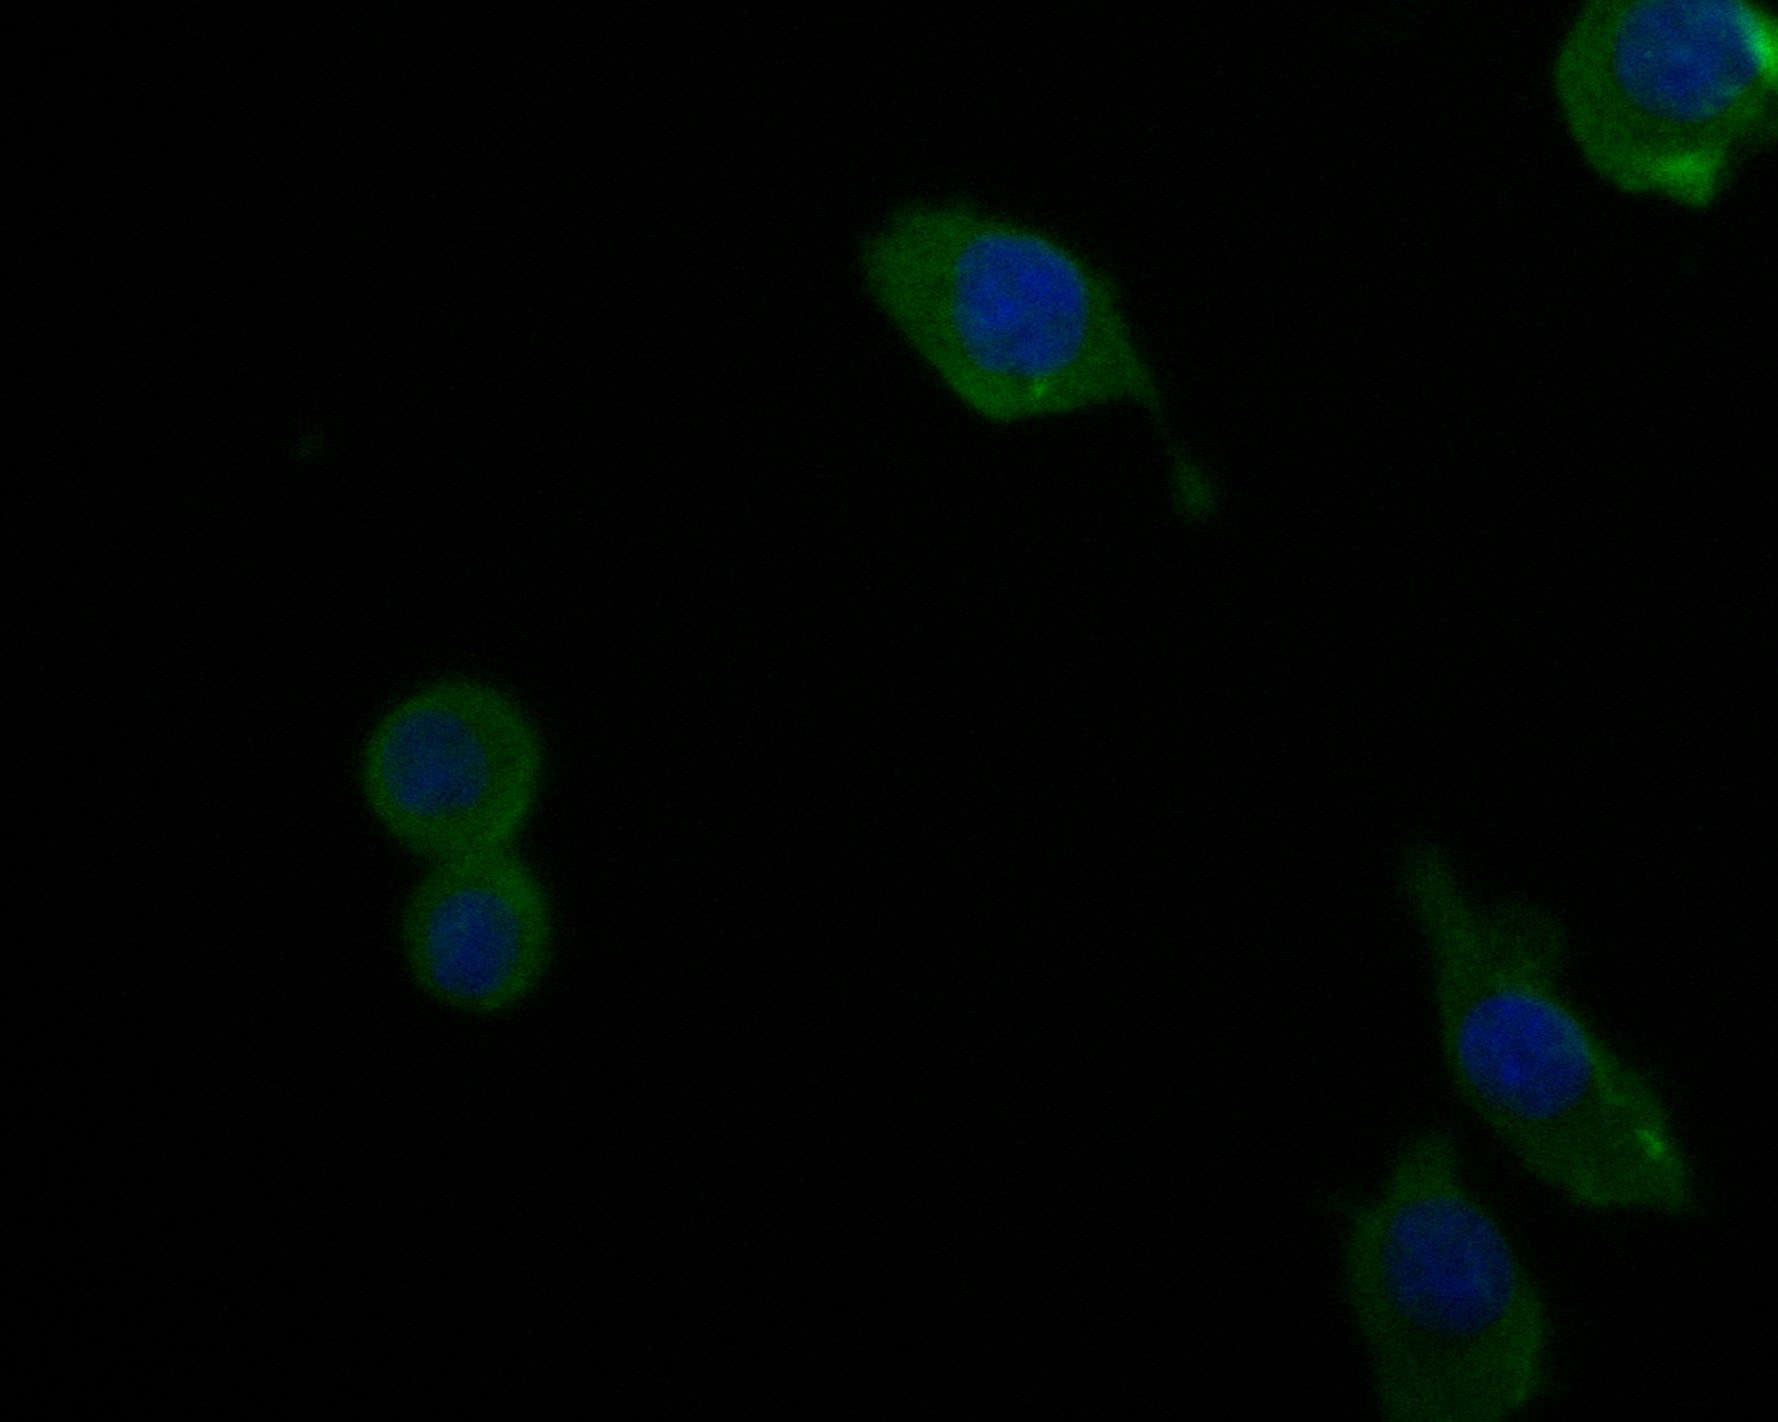 ICC staining of Complement factor B in SKOV-3 cells (green). Formalin fixed cells were permeabilized with 0.1% Triton X-100 in TBS for 10 minutes at room temperature and blocked with 1% Blocker BSA for 15 minutes at room temperature. Cells were probed with the primary antibody (HA500036, 1/200) for 1 hour at room temperature, washed with PBS. Alexa Fluor®488 Goat anti-Rabbit IgG was used as the secondary antibody at 1/1,000 dilution. The nuclear counter stain is DAPI (blue).